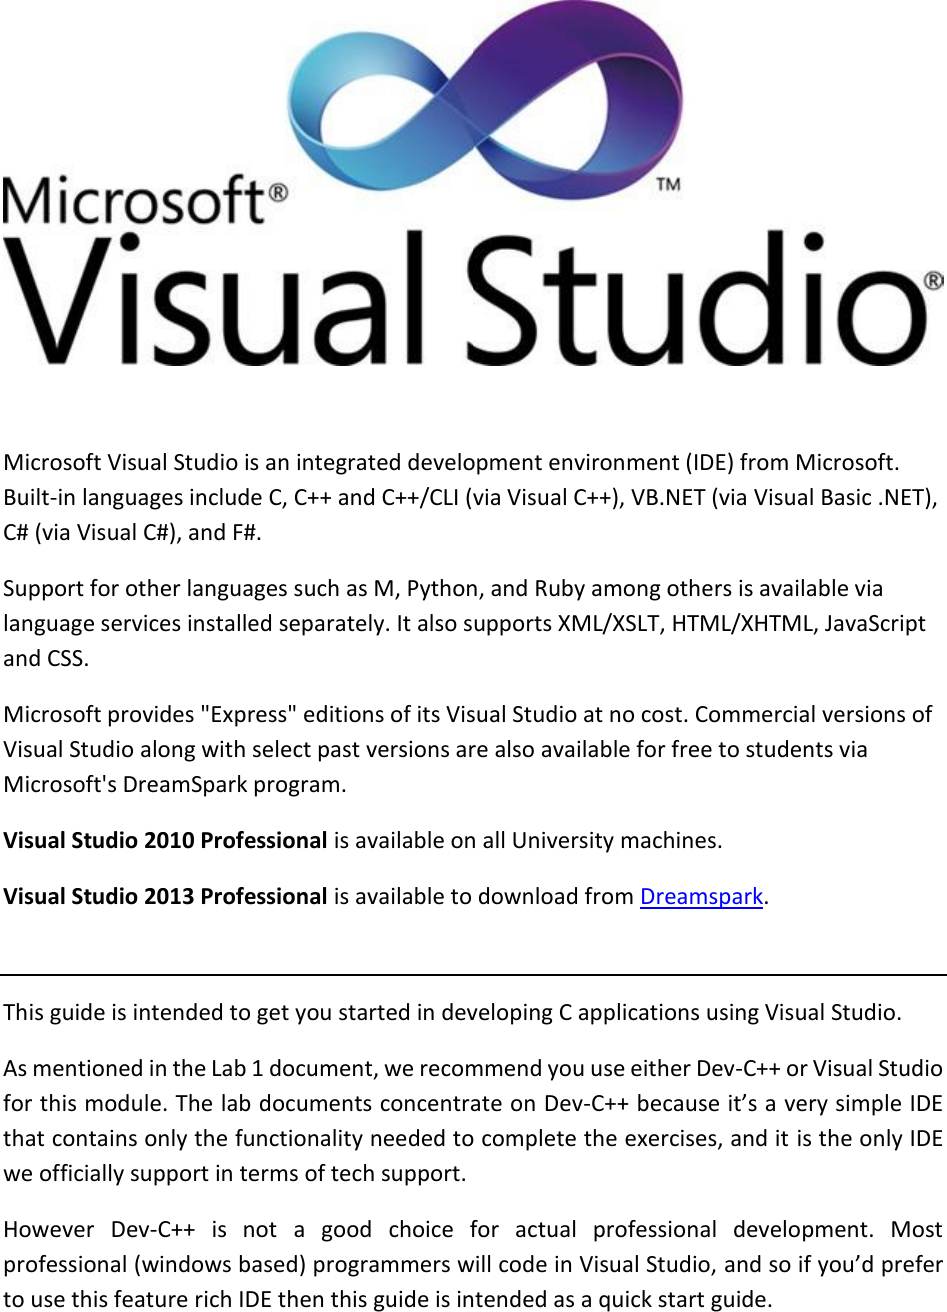 Page 2 of 7 - Visual Studio Guide